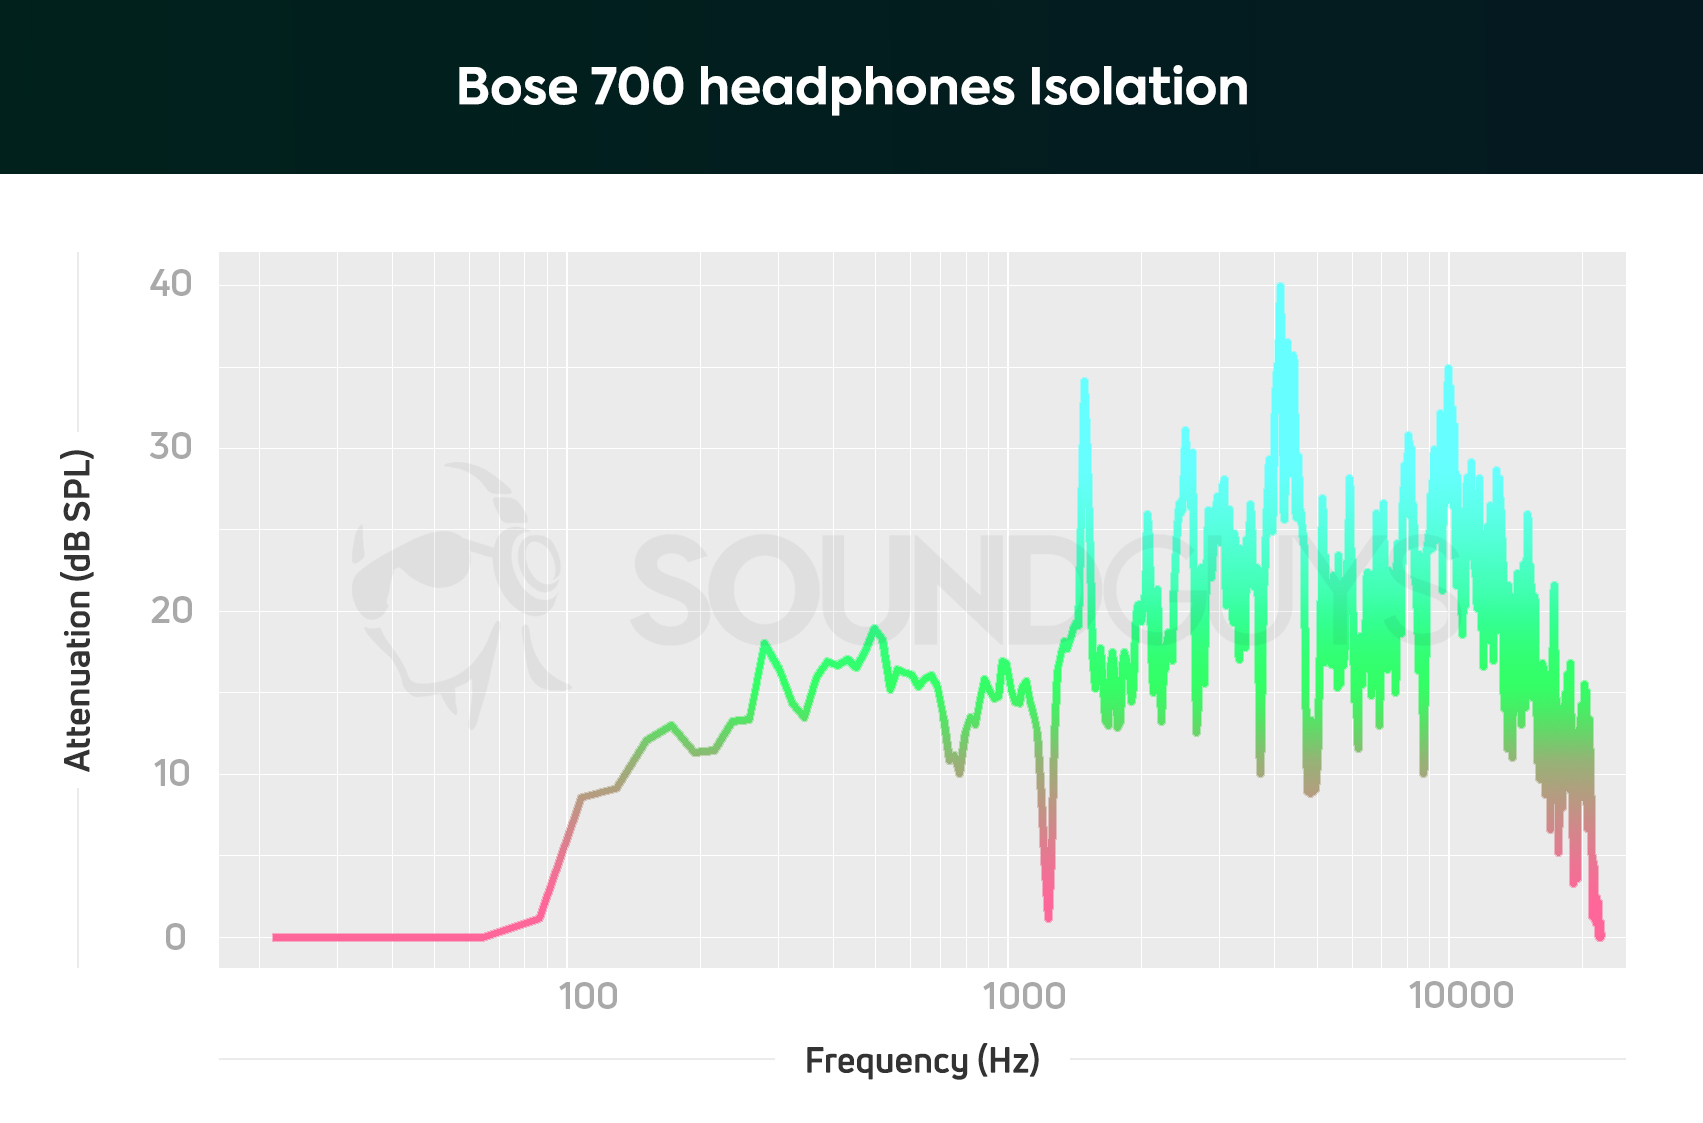 This isolation graph of the Bose Noise Canceling Headphones 700 shows an impressive canceling of frequencies between 100-1000Hz with strong cancellation above 1000Hz.